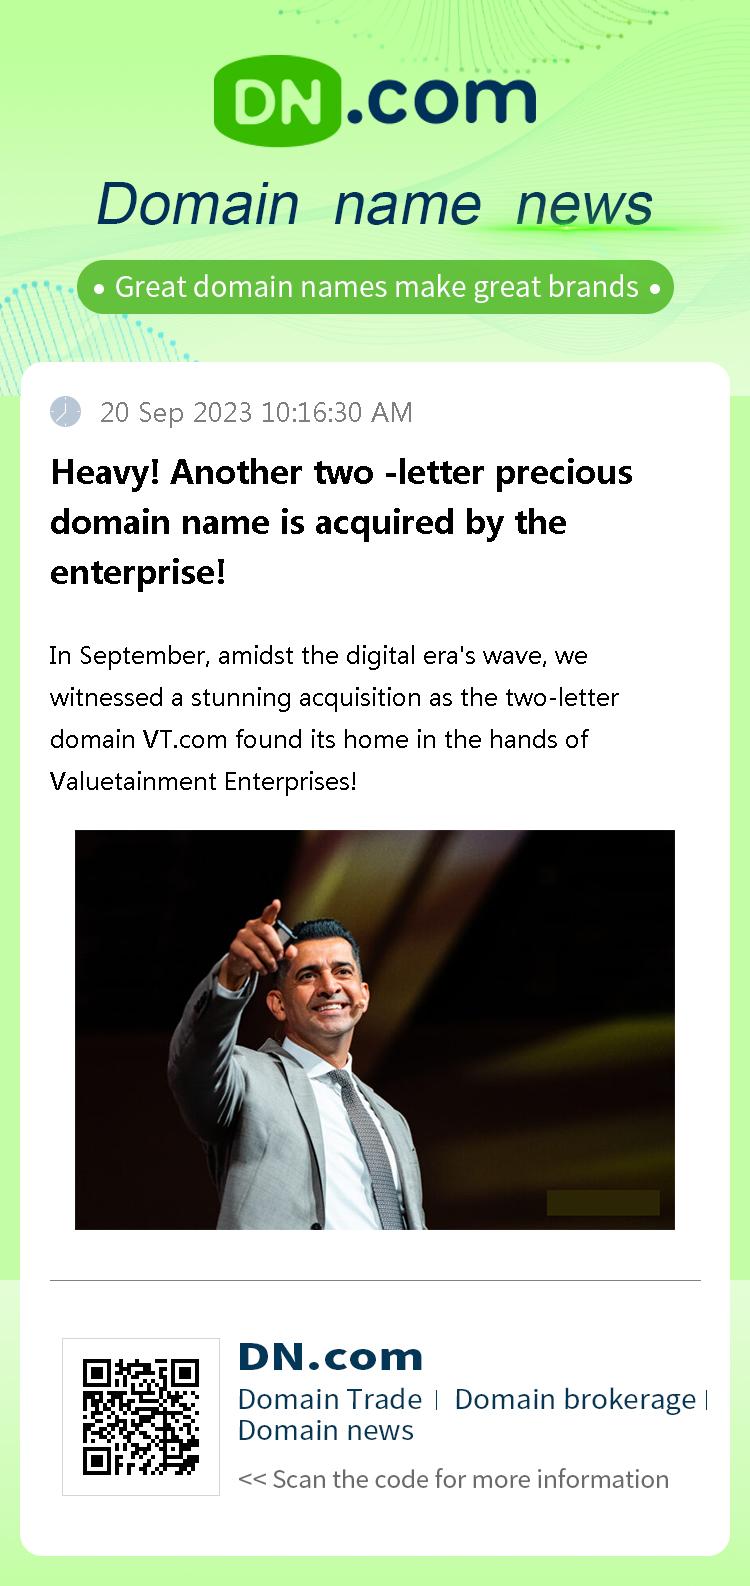 Heavy! Another two -letter precious domain name is acquired by the enterprise!